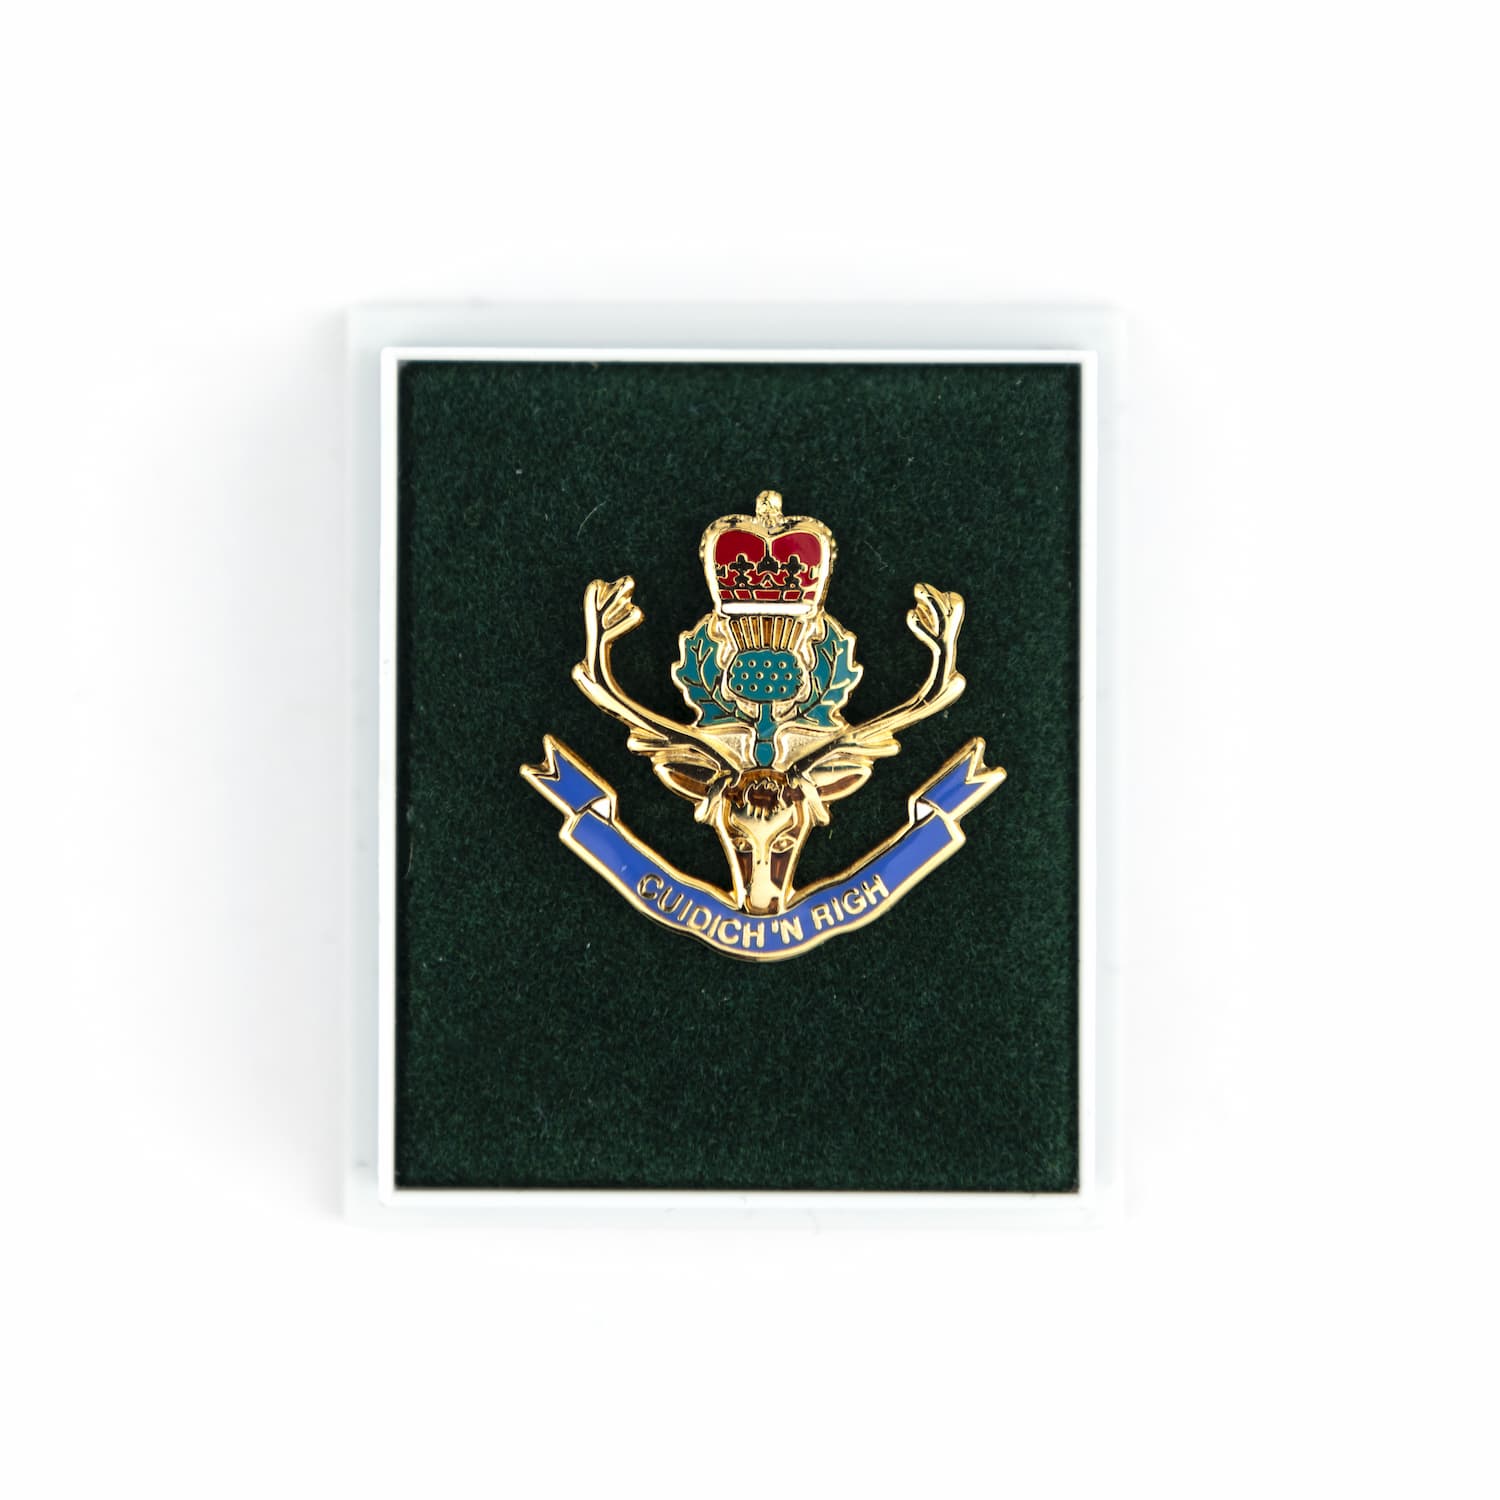 Queen's Own Highlanders (Seaforth and Camerons) lapel badge